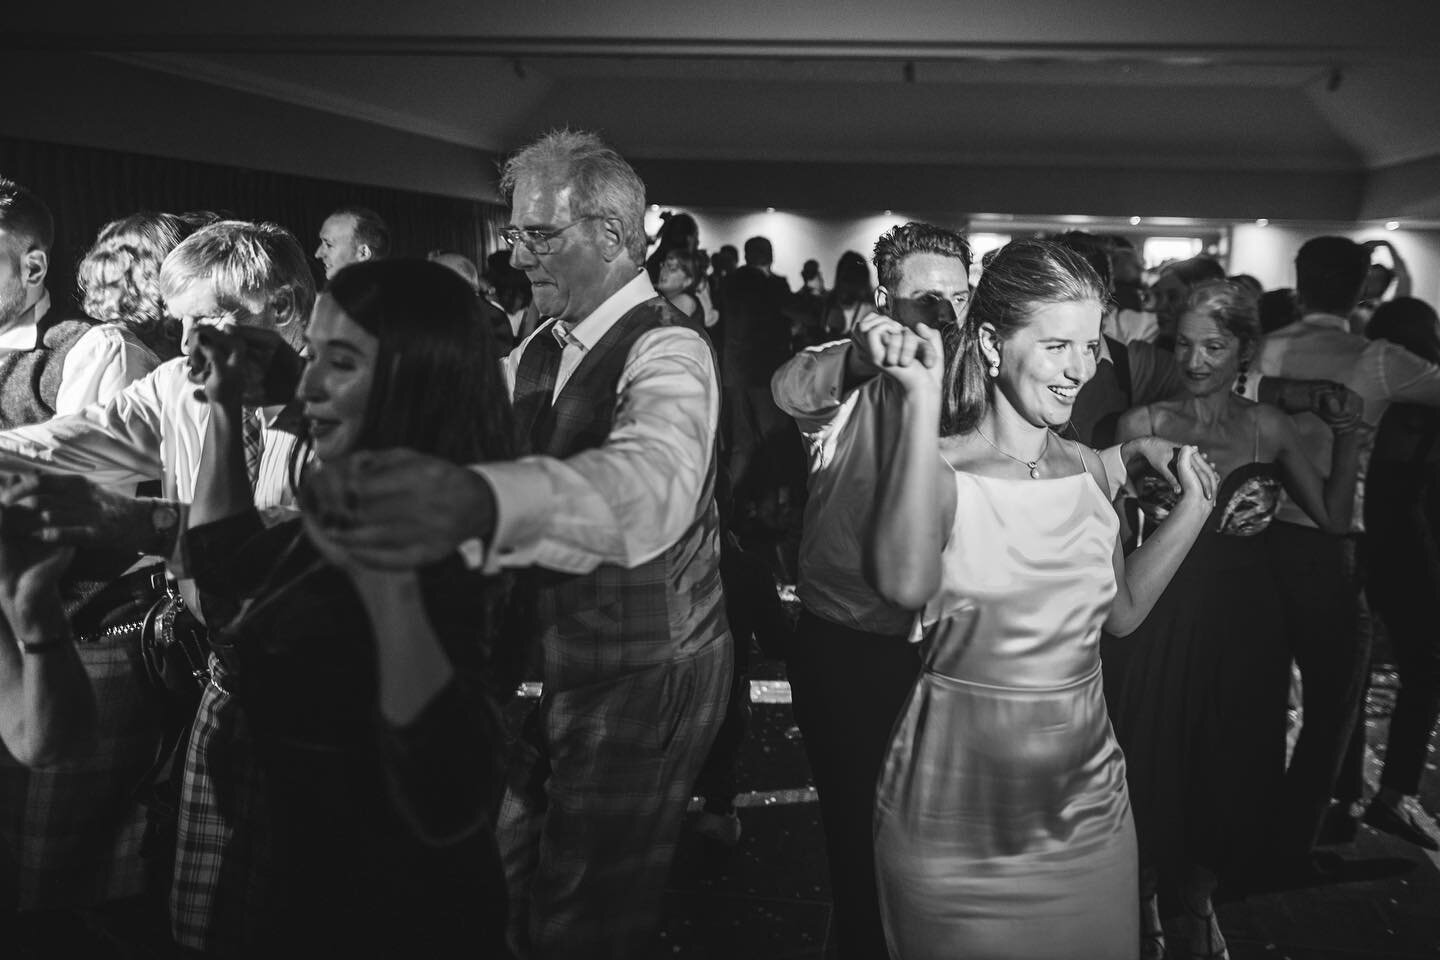 Friday 9th September // Sophie and Christoph at @ruffletshotel. A half-German wedding where we partied until 3am!

Saturday 10th September // Amber and Ross. We initially met right before the word &lsquo;Pandemic&rsquo; entered our daily vocabularies